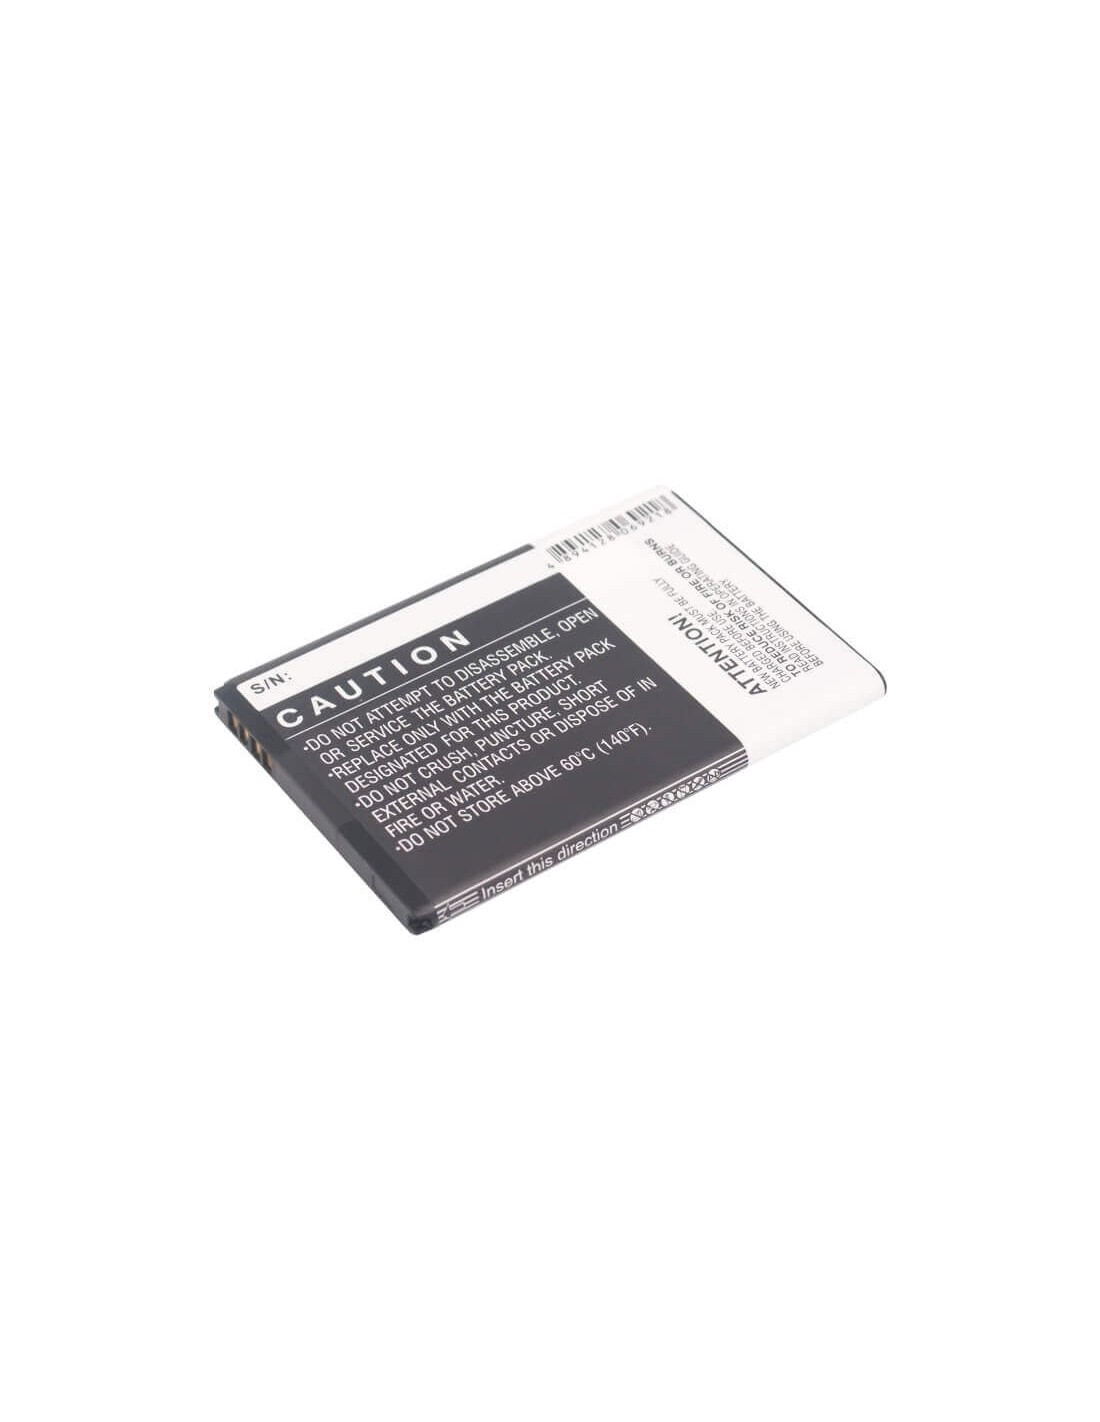 Battery for HTC Droid Incredible 2, Droid Incredible II, ADR6350 3.7V, 1600mAh - 5.92Wh